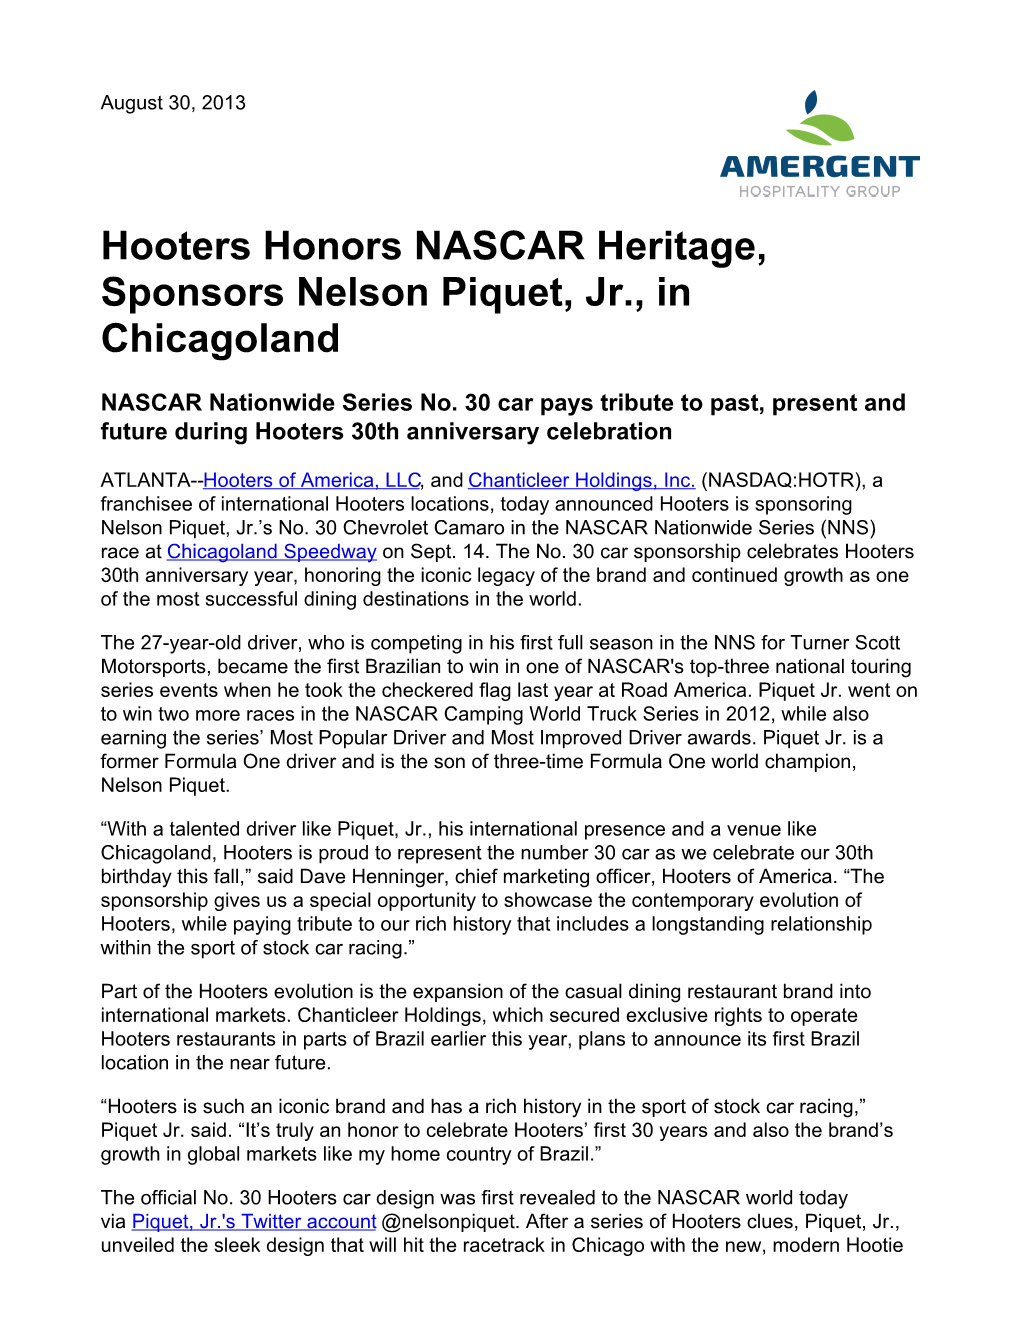 Hooters Honors NASCAR Heritage, Sponsors Nelson Piquet, Jr., in Chicagoland